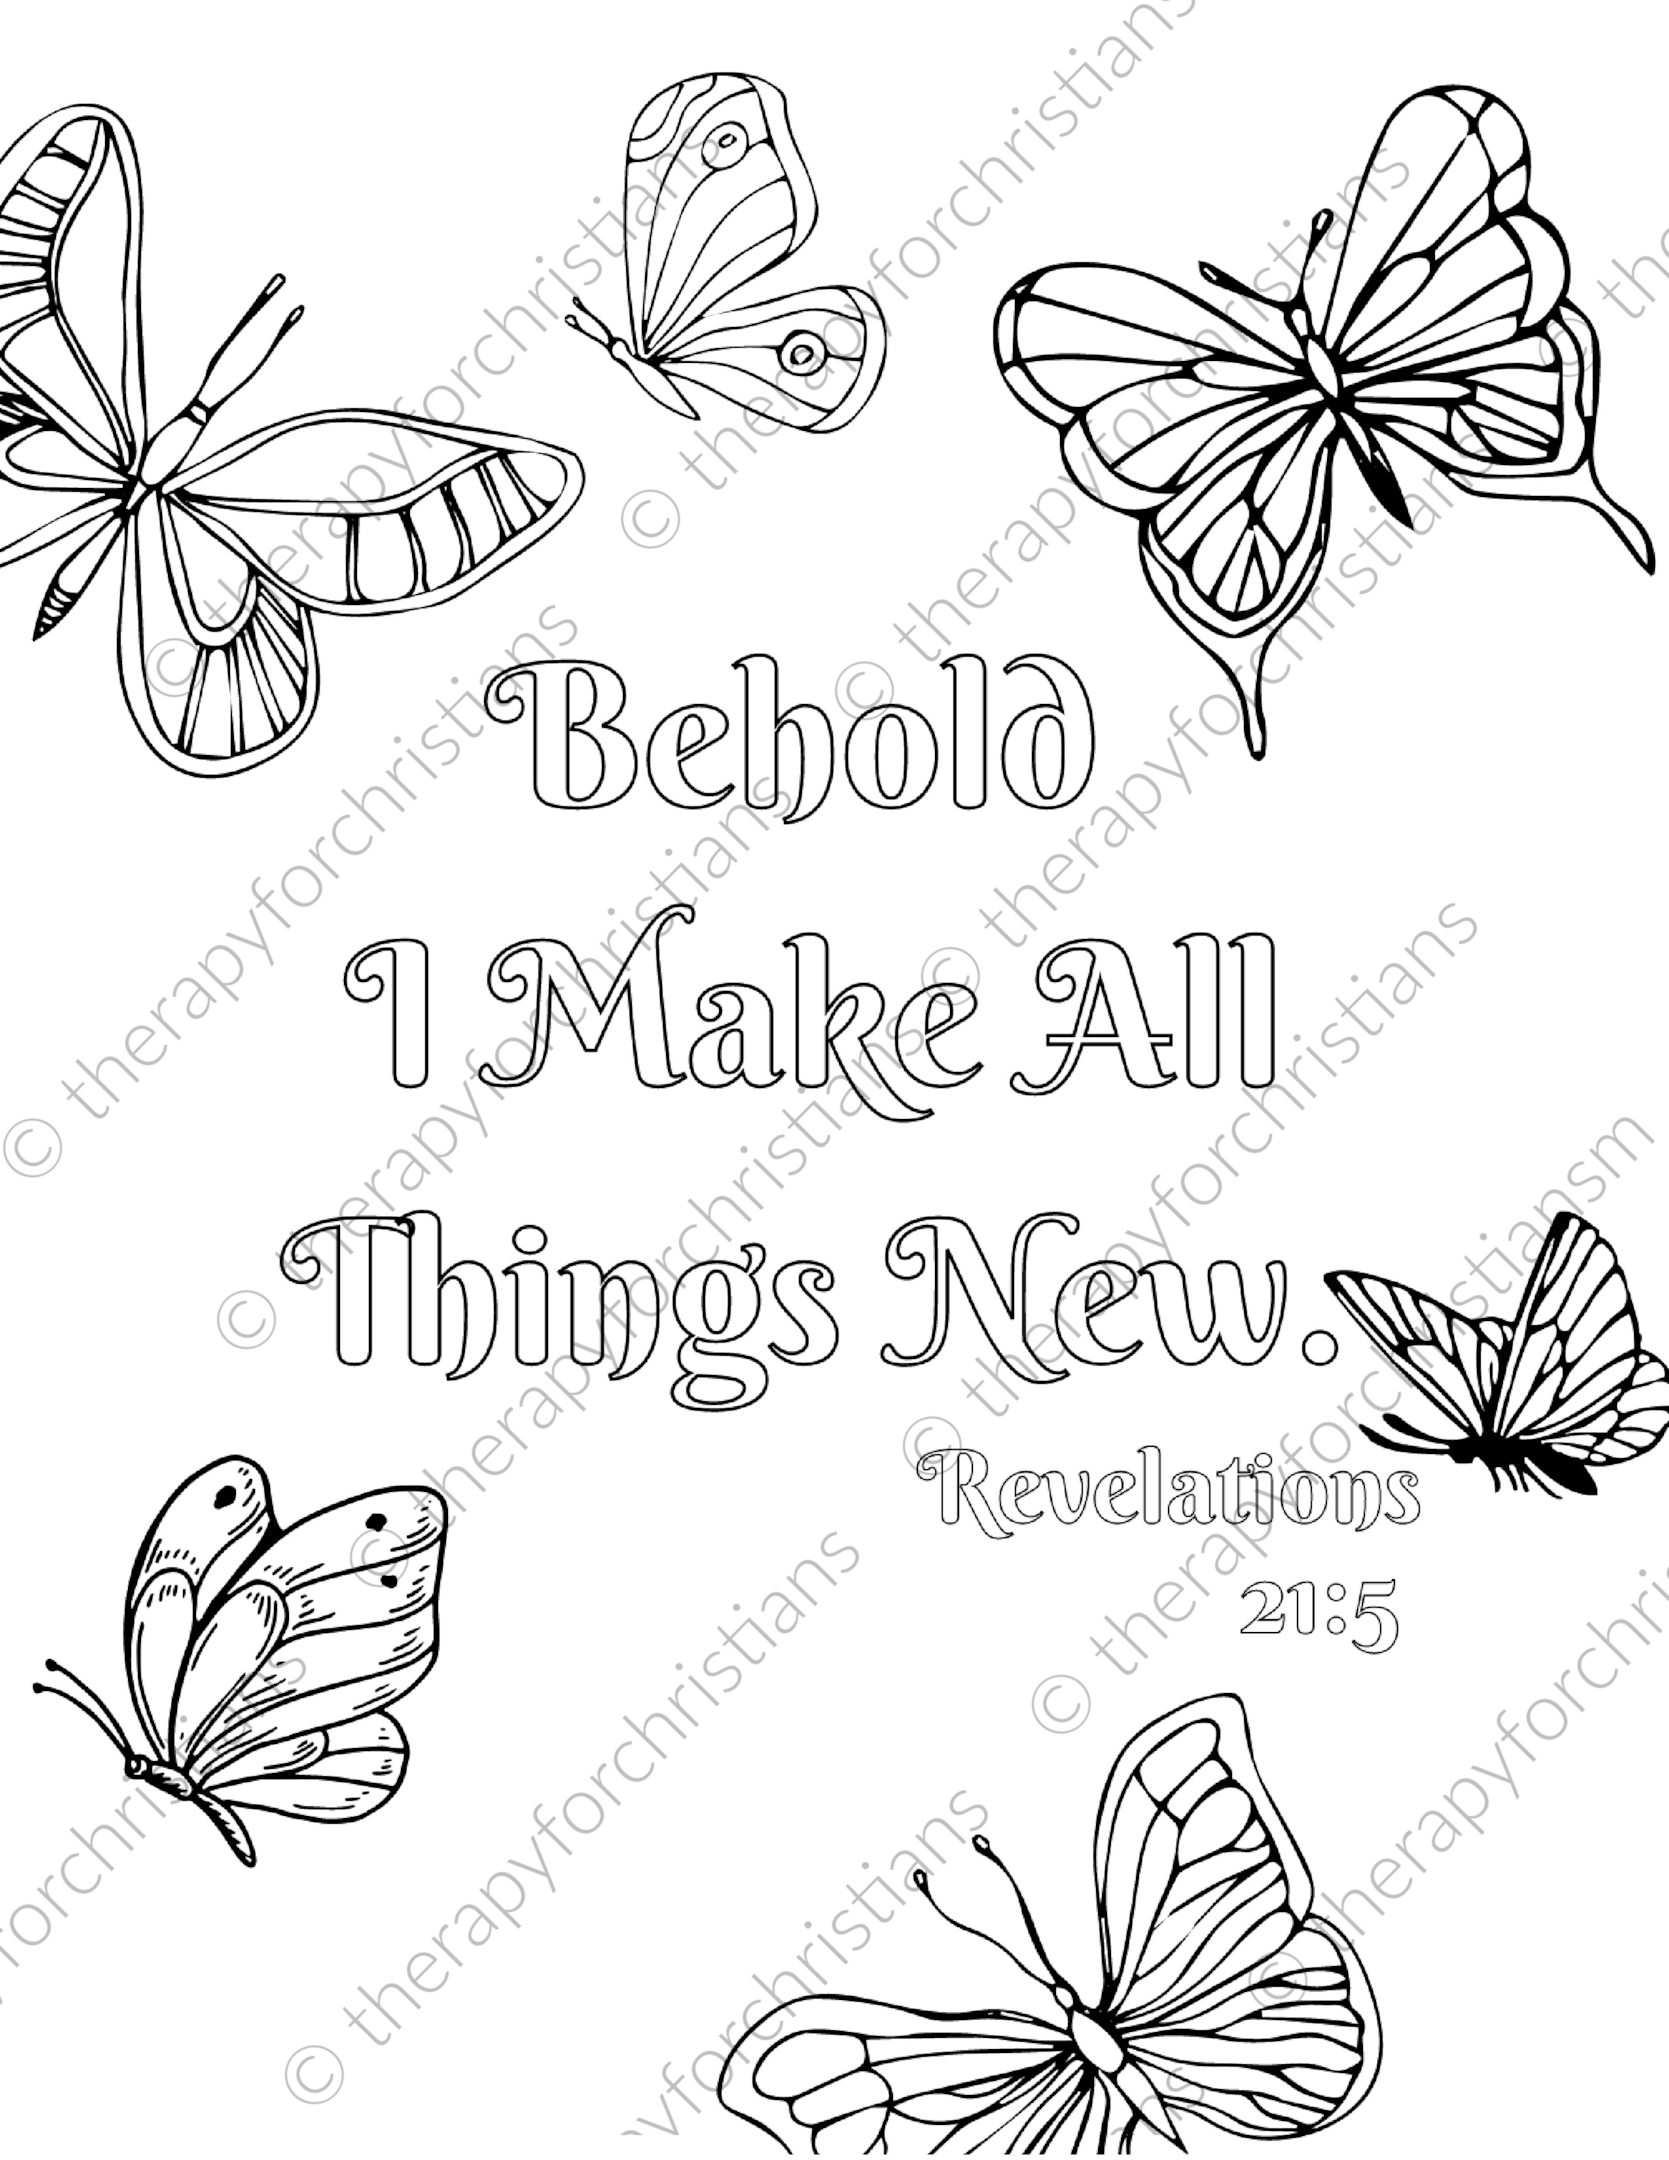 Revelations 21:5 scripture coloring pages